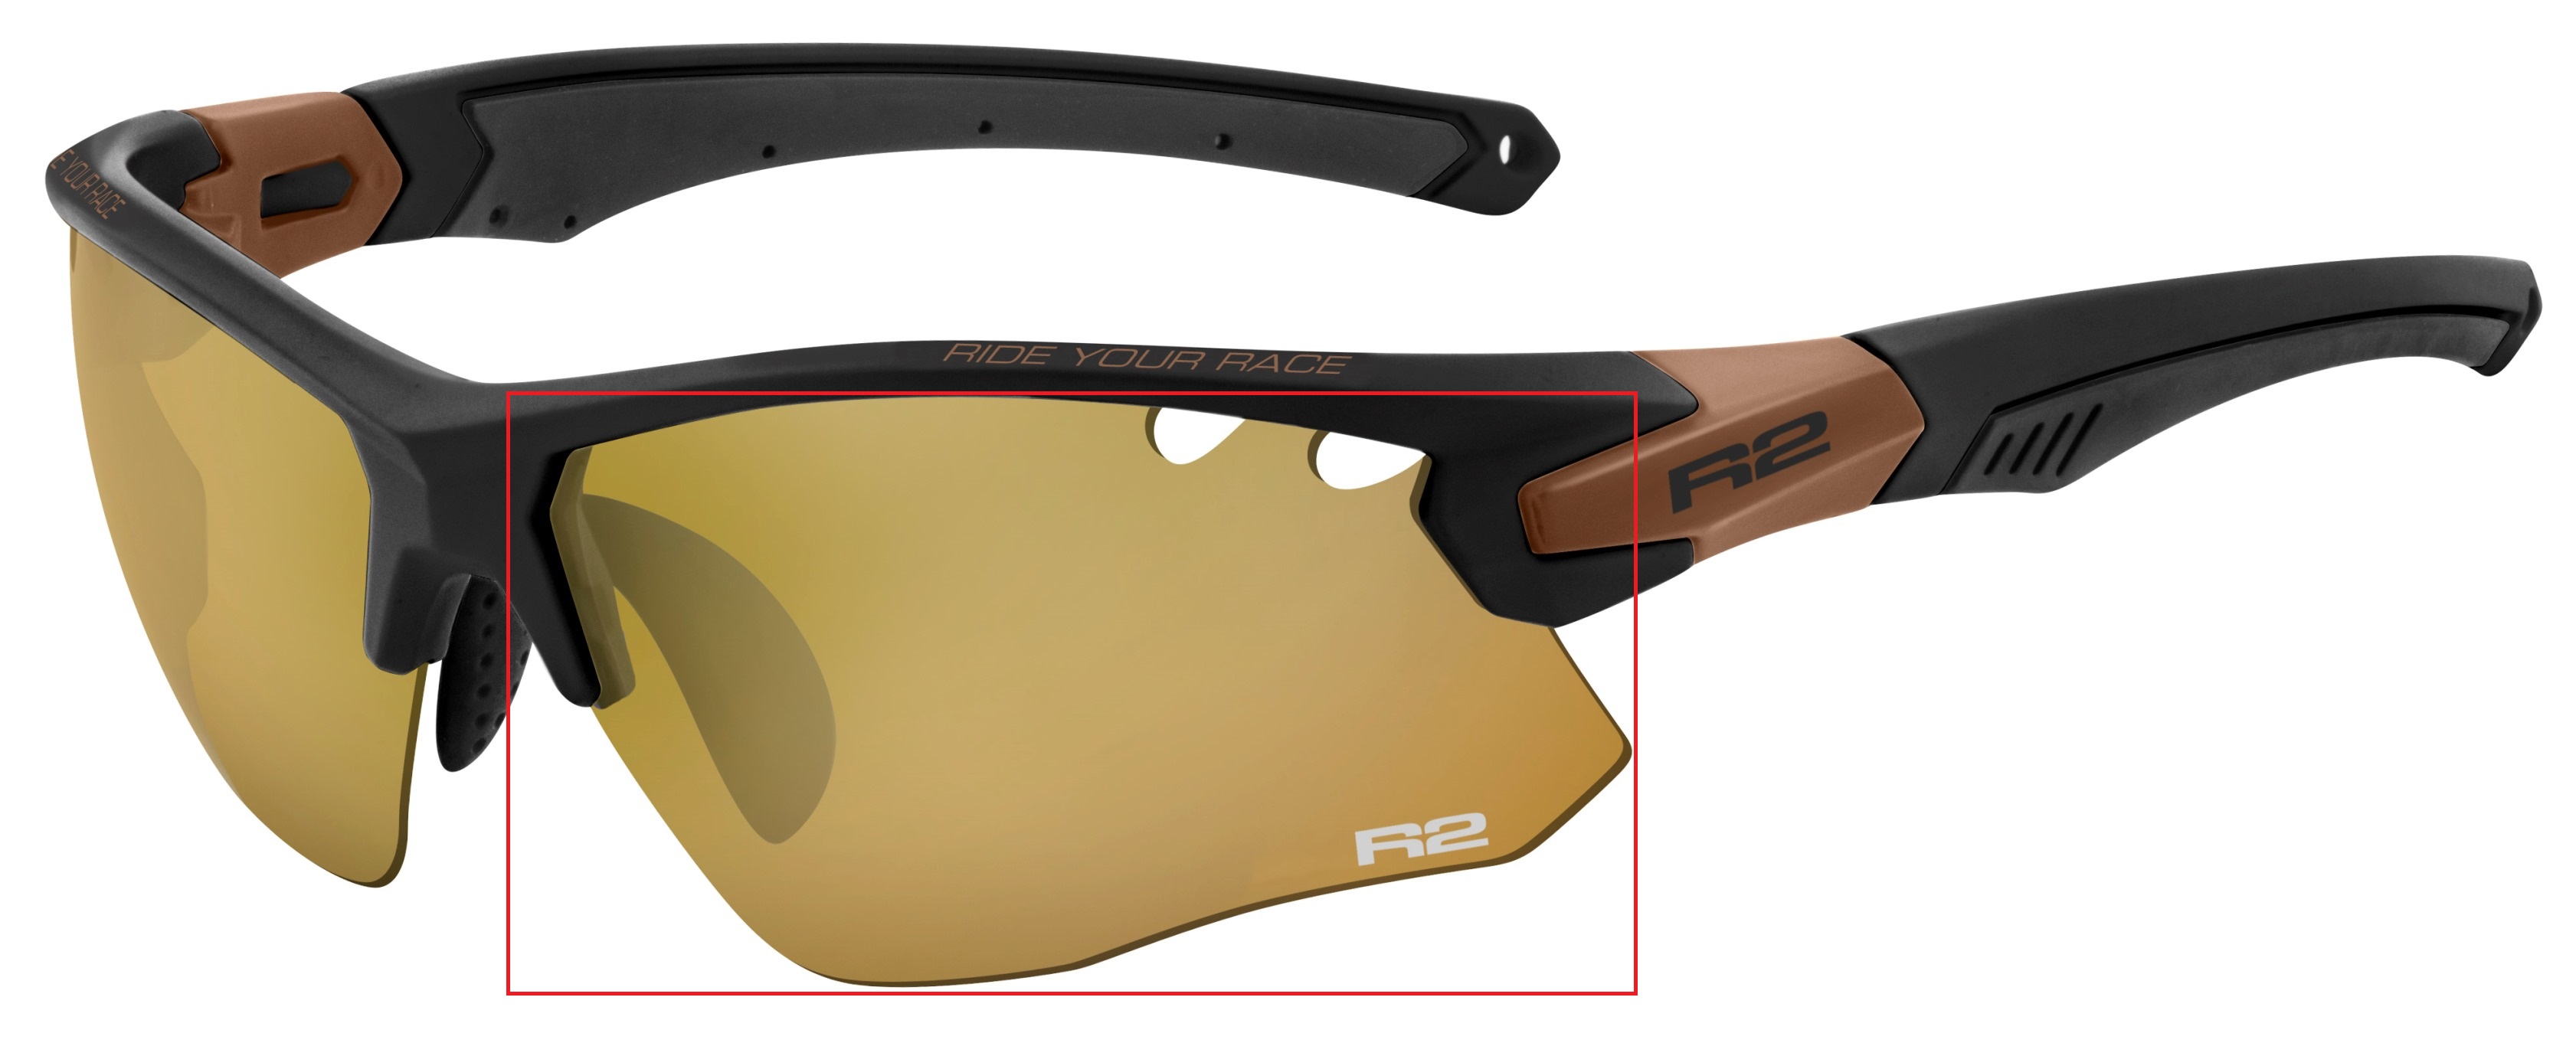 Replacement lenses for the R2 Crown AT078 photochromic model